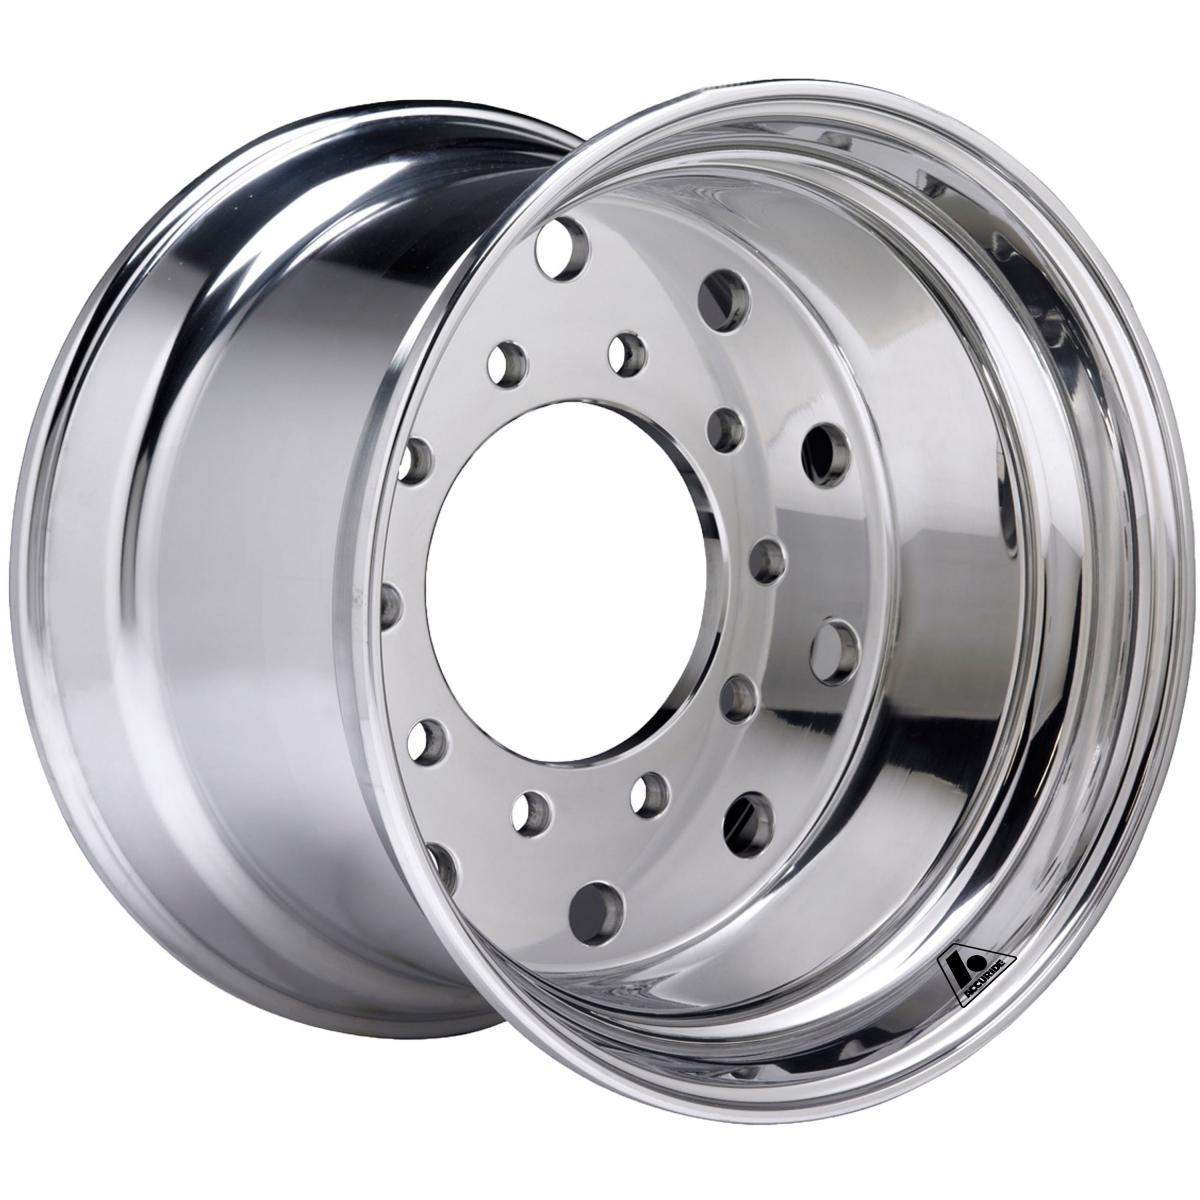 Accuride® 24.5 x 8.25 Ultra Polished